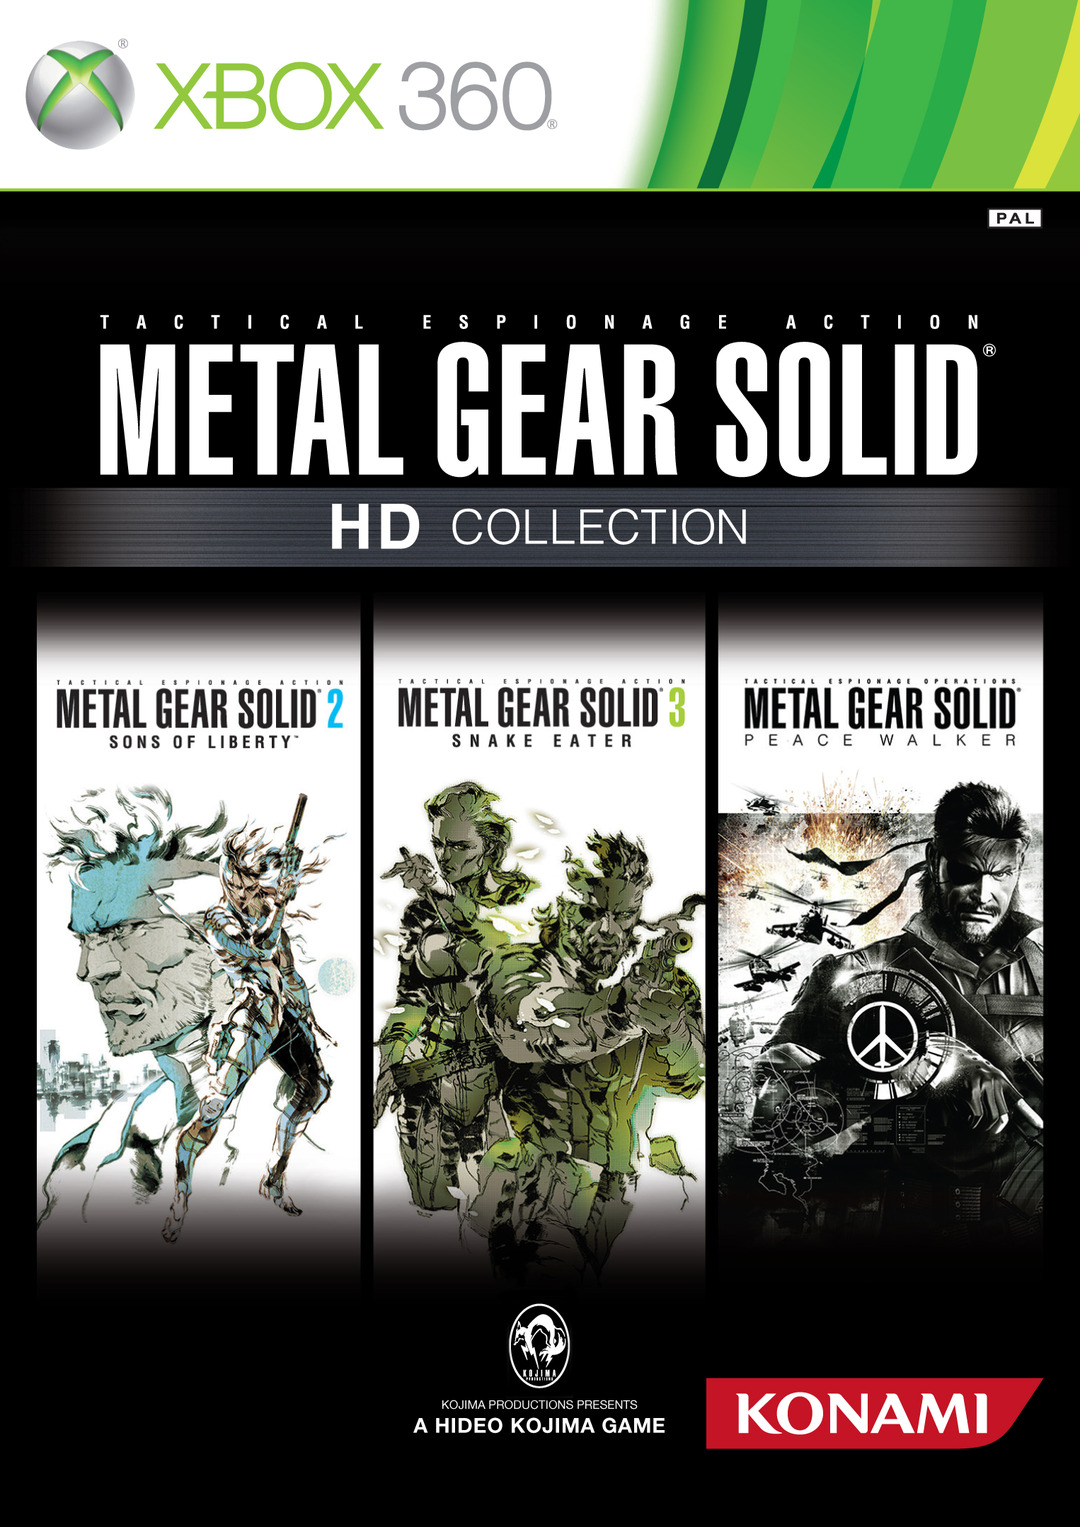 Metal Gear Solid HD Collection [PAL] [FR] XBOX360 (exclue) [DF] Jaquette-metal-gear-solid-hd-collection-xbox-360-cover-avant-g-1313607094